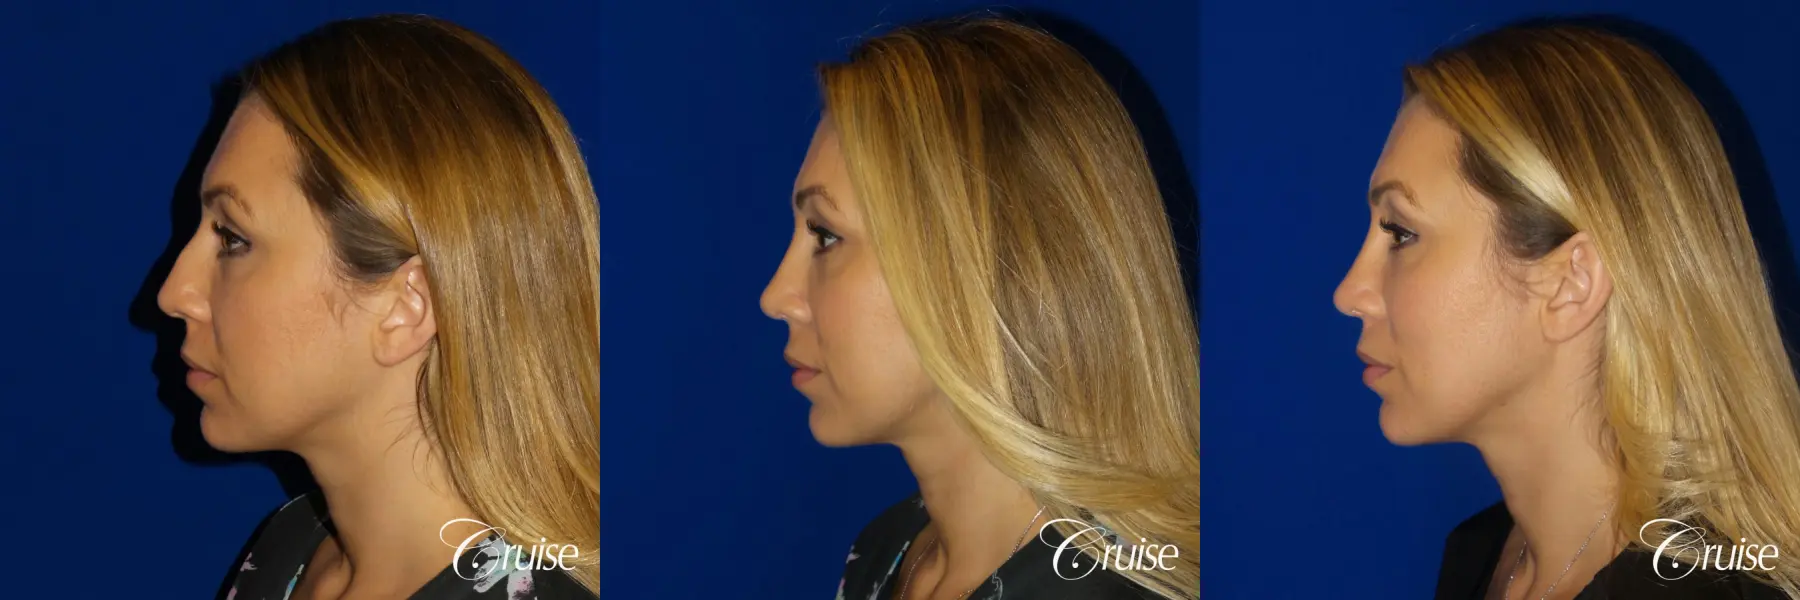 Rhinoplasty: Hump Reduction & Nasal Tip Refinement - Before and After 4